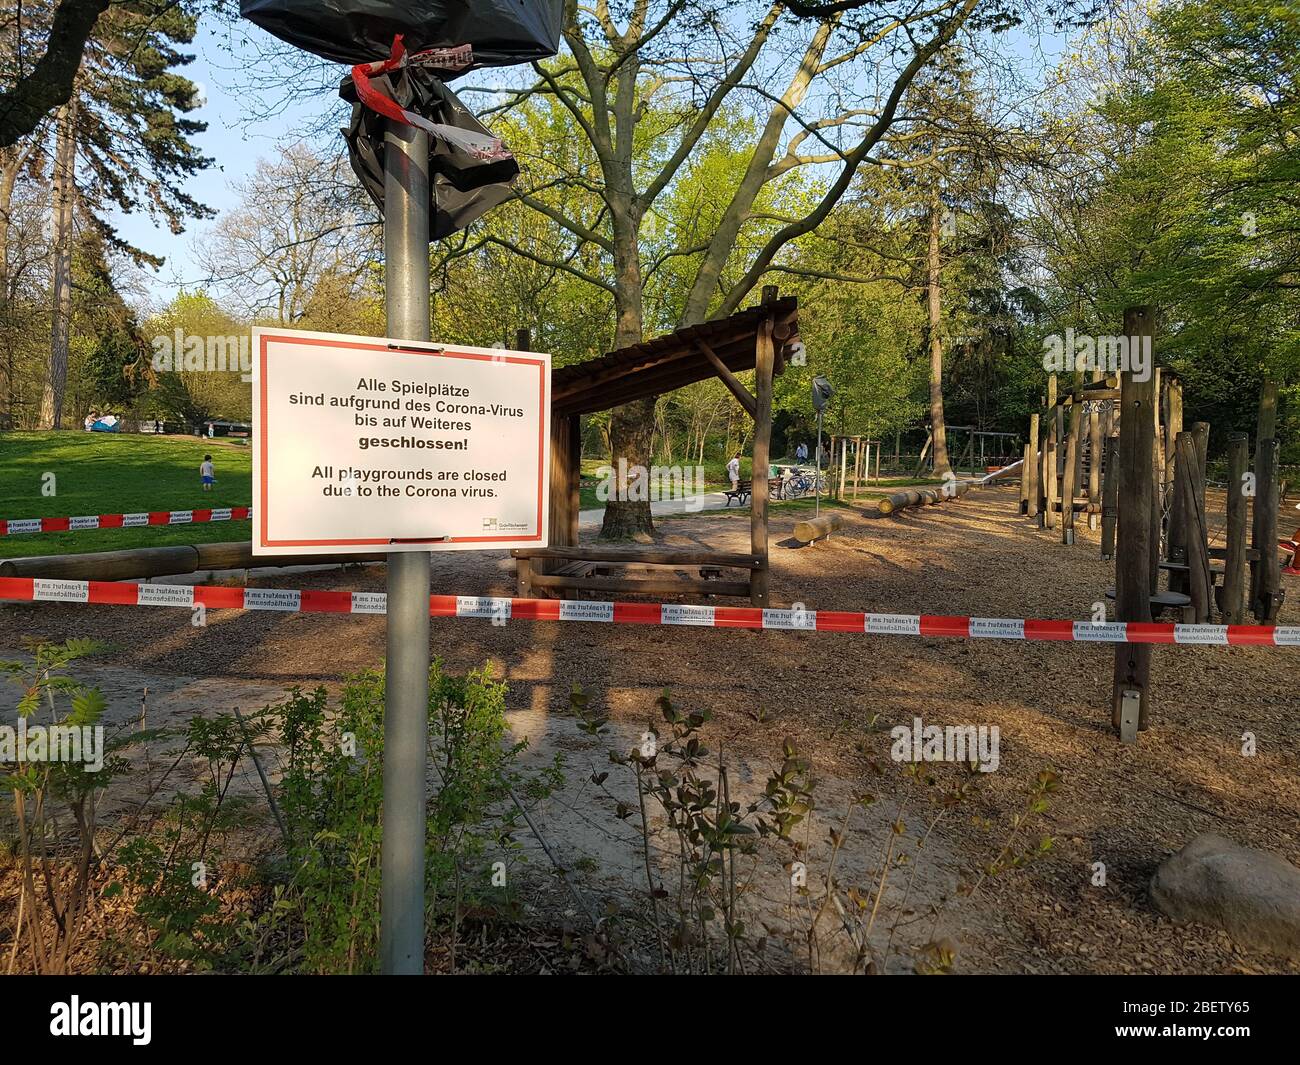 Empty , abandoned children park playground closed with police barrier tape and warning sign - prohibition to enter play field - corona virus covid-19 Stock Photo